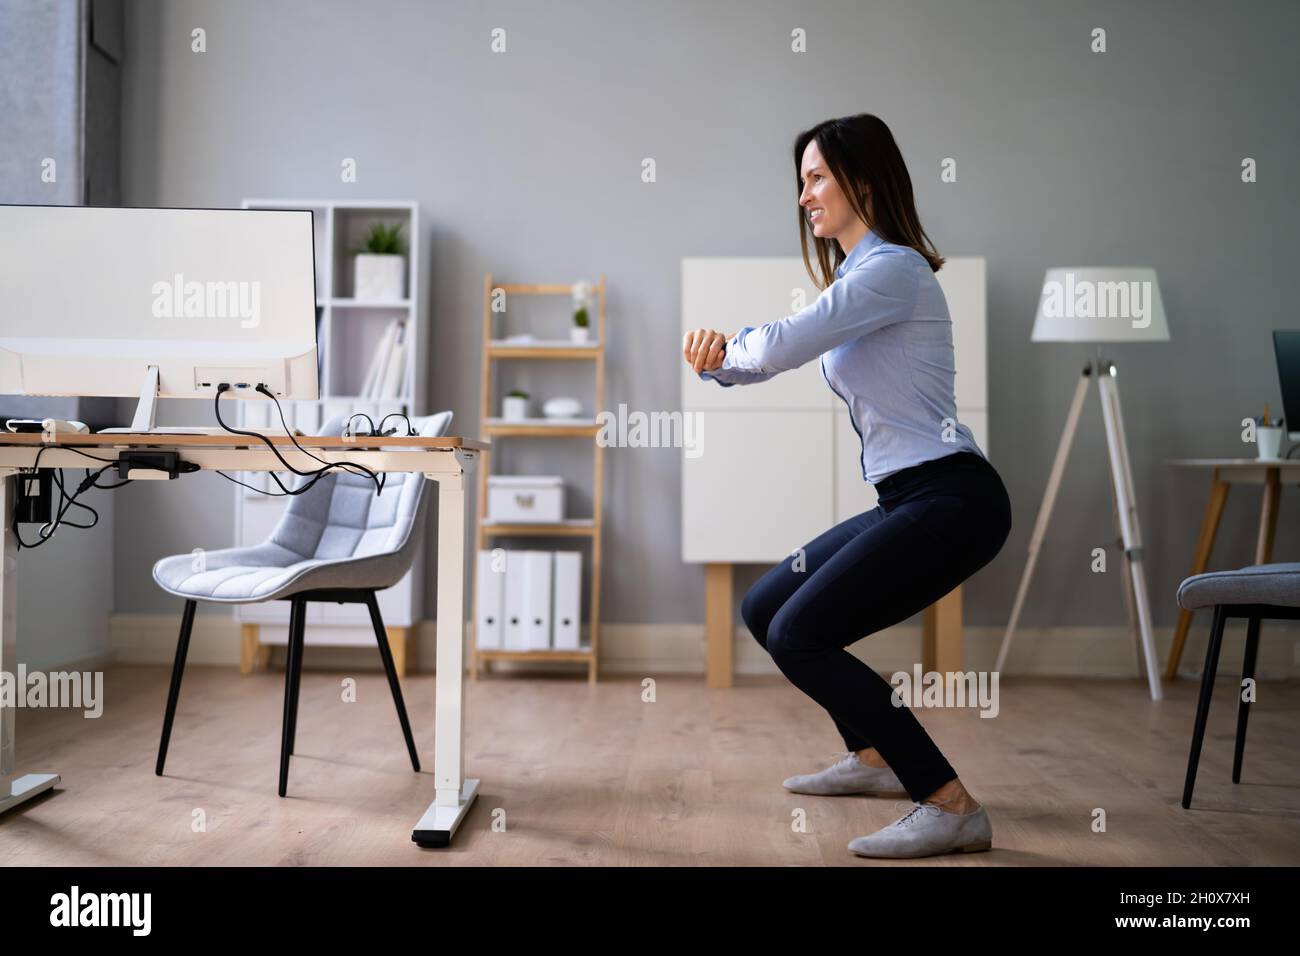 Workplace Sit Up Exercise At Office Desk Stock Photo